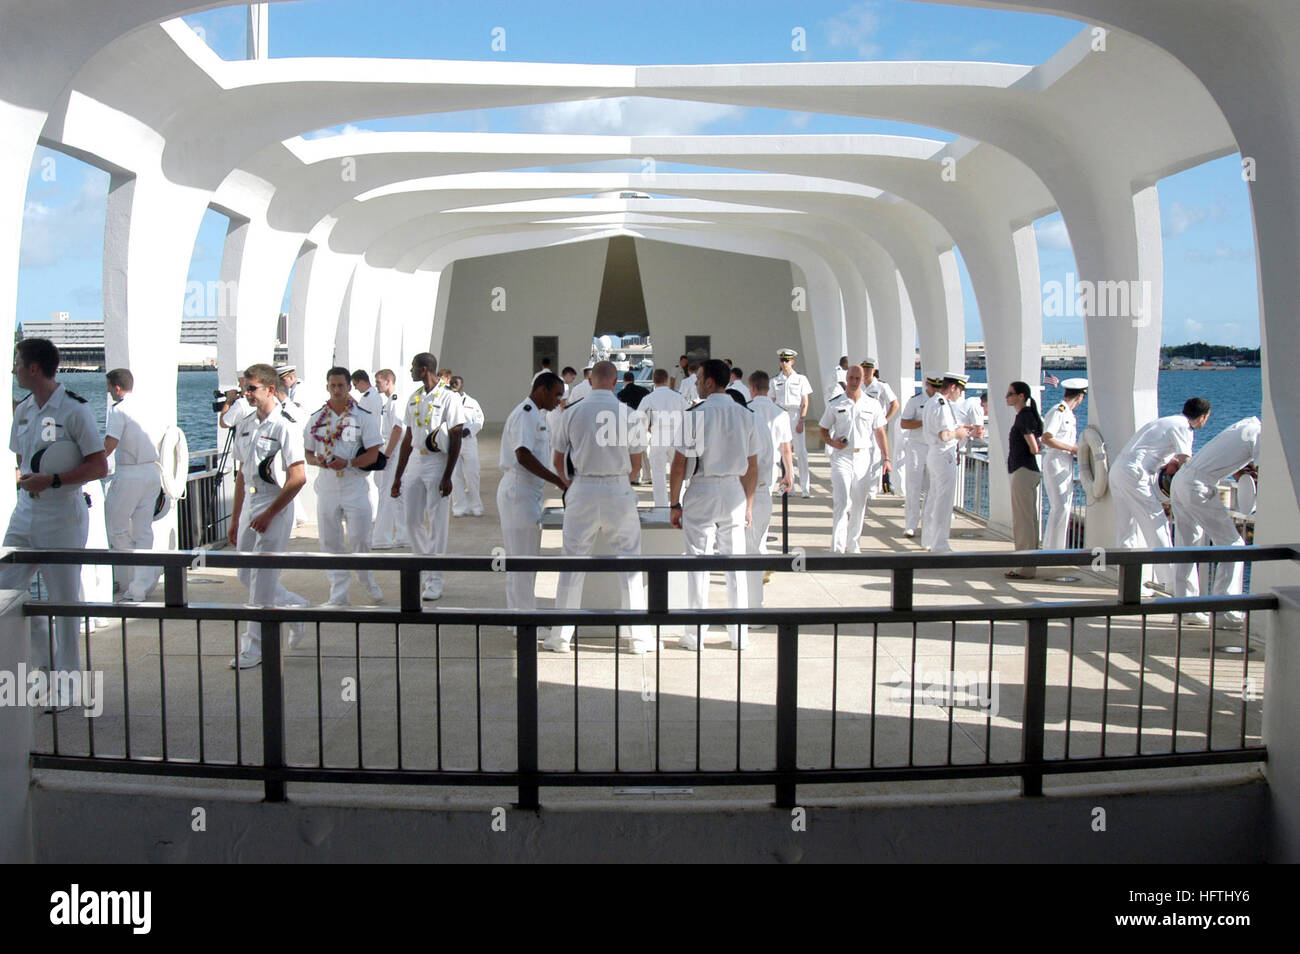 070320-N-6674H-099 PEARL HARBOR, Hawaii (March 20, 2007) - Members of U.S. Naval Academy's Men's Glee Club visit the USS Arizona Memorial to pay their respects to the victims of the Japanese attack on Pearl Harbor. The group toured Hawaii singing at various locales and performed the Navy Hymn at the USS Arizona Memorial to honor the 1,177 Sailors and Marines killed aboard the ship Dec. 7, 1941. U.S. Navy photo by Mass Communication Specialist Seaman Paul D. Honnick (RELEASED) US Navy 070320-N-6674H-099 Members of U.S. Naval Academy's Men's Glee Club visit the USS Arizona Memorial to pay their  Stock Photo